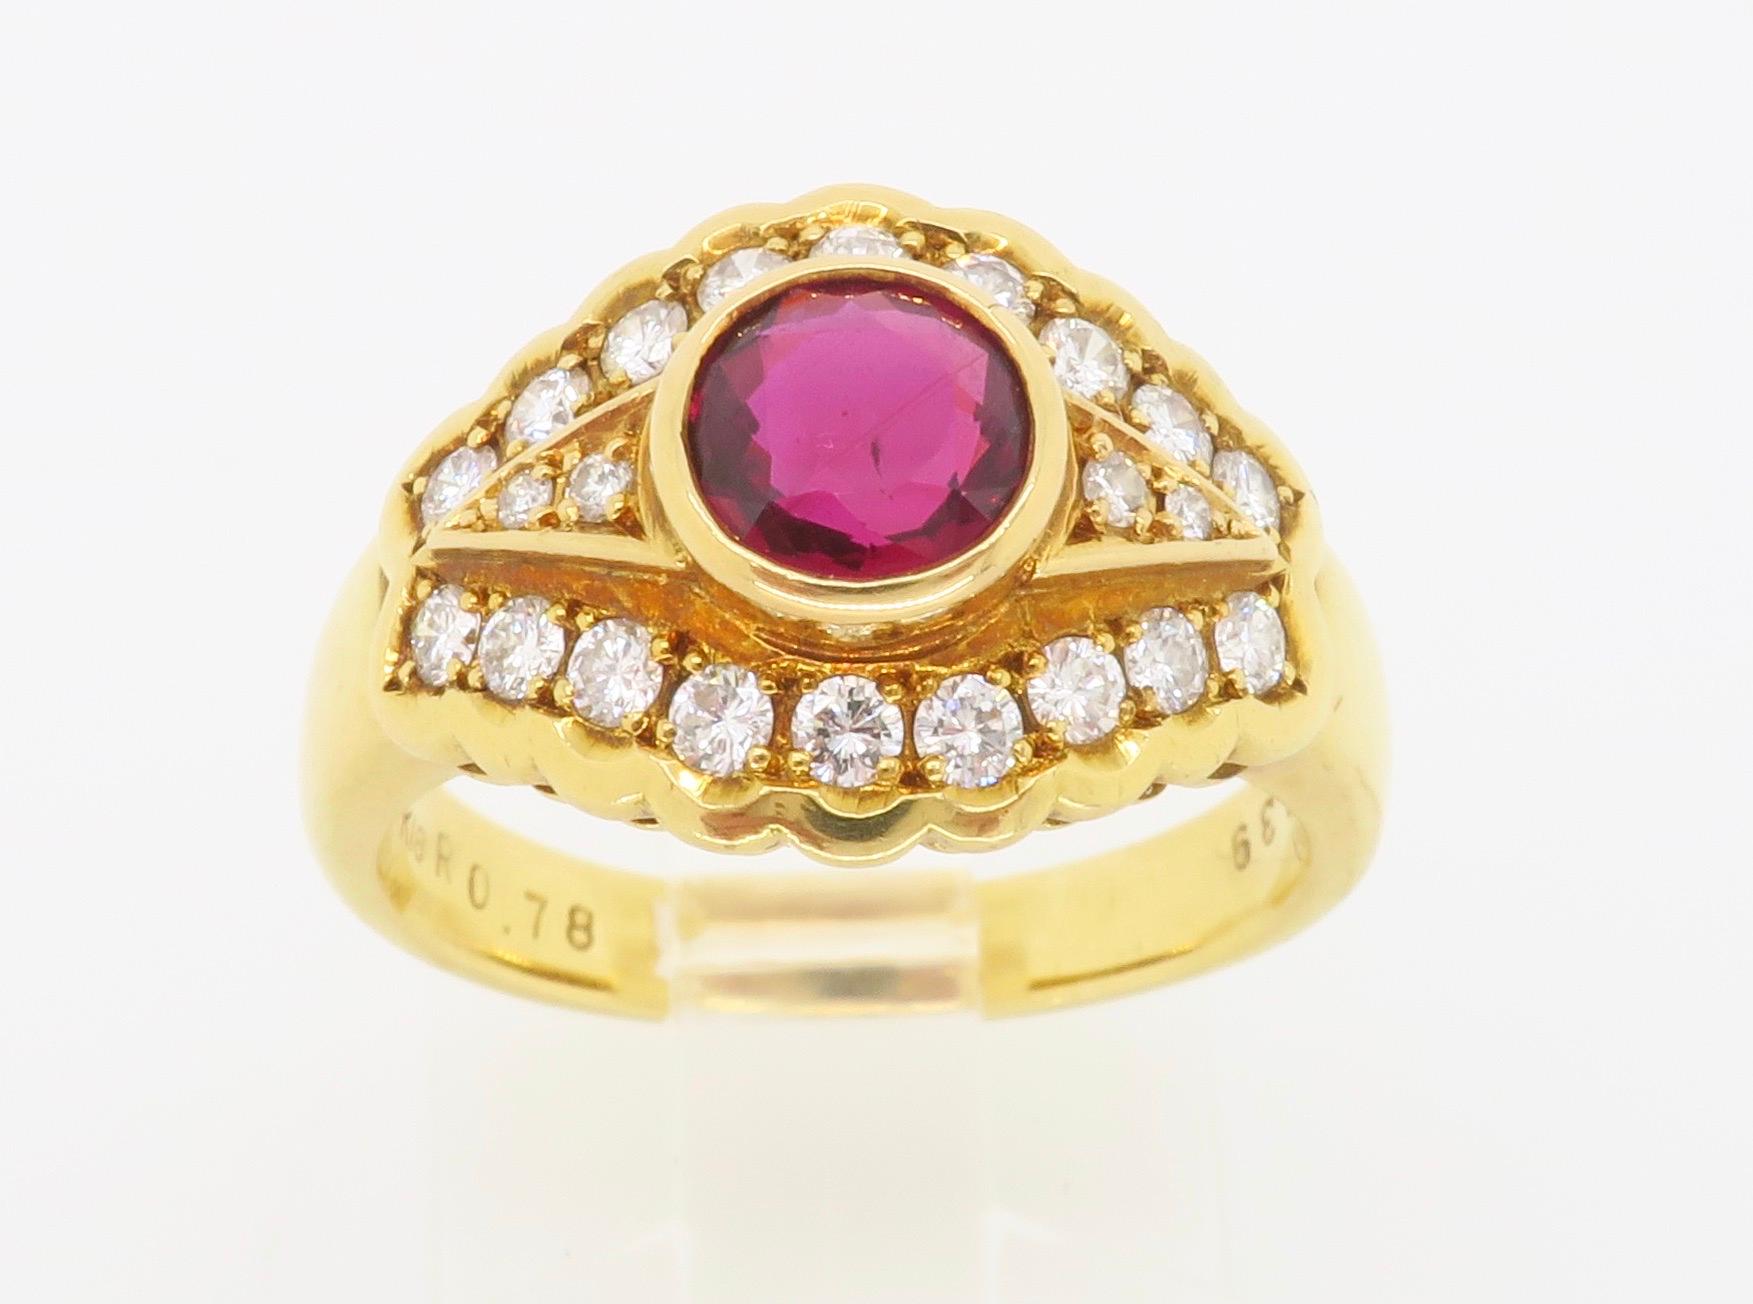 Ruby & Diamond Ring Made in 18k Yellow Gold 1